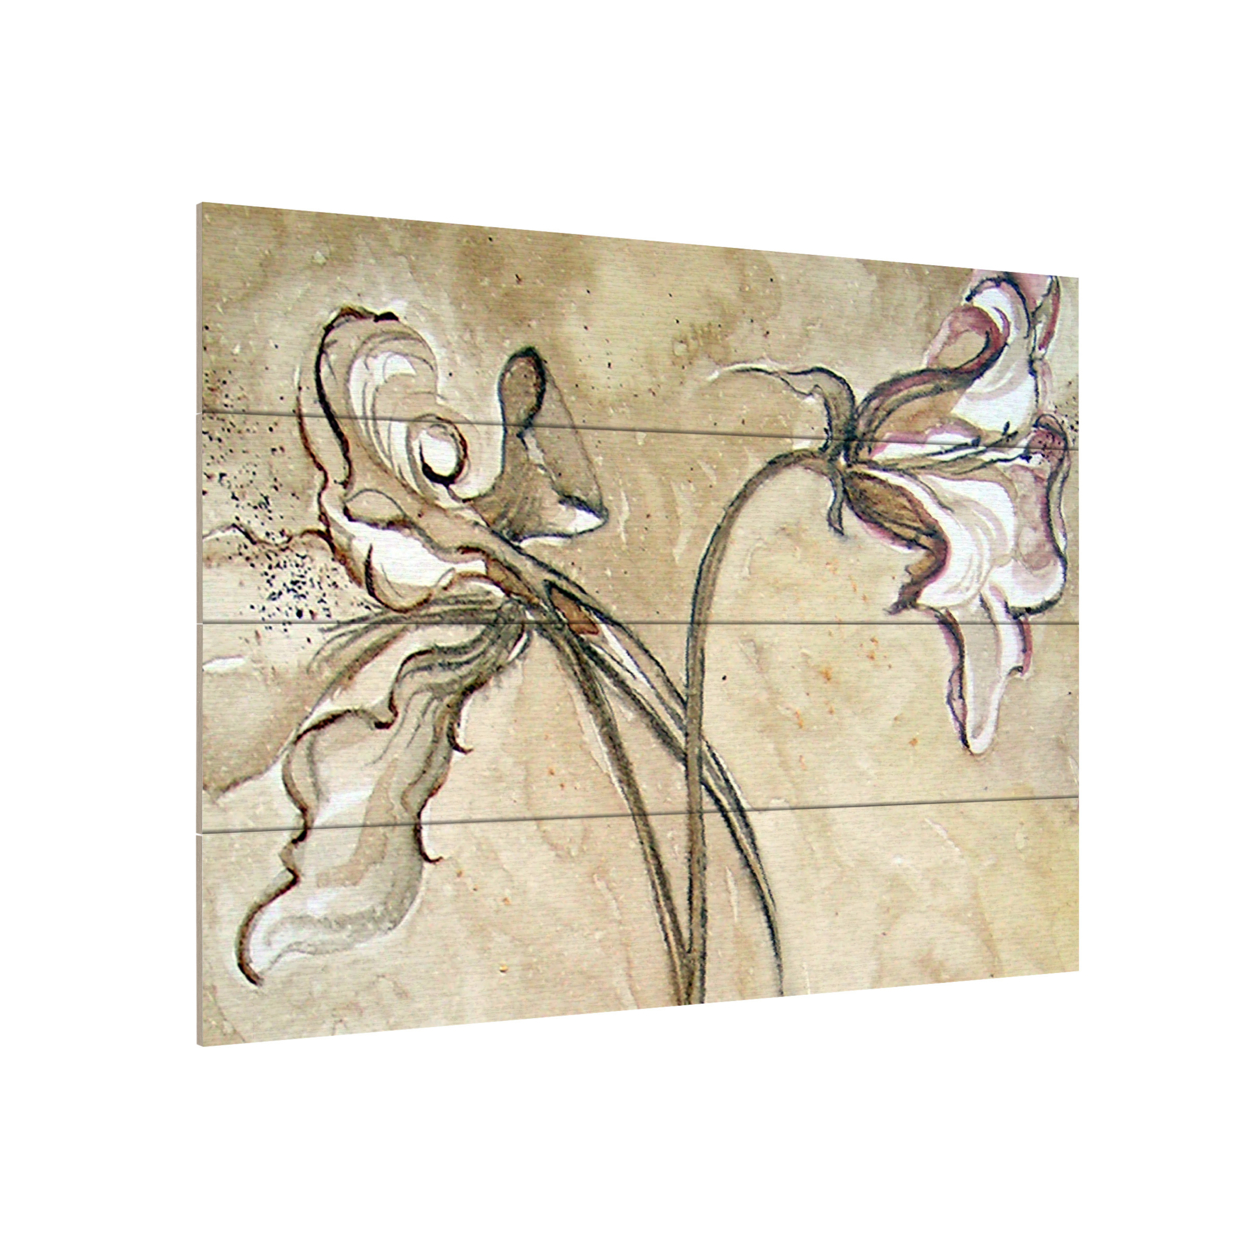 Wall Art 12 X 16 Inches Titled Flower Talks Ready To Hang Printed On Wooden Planks